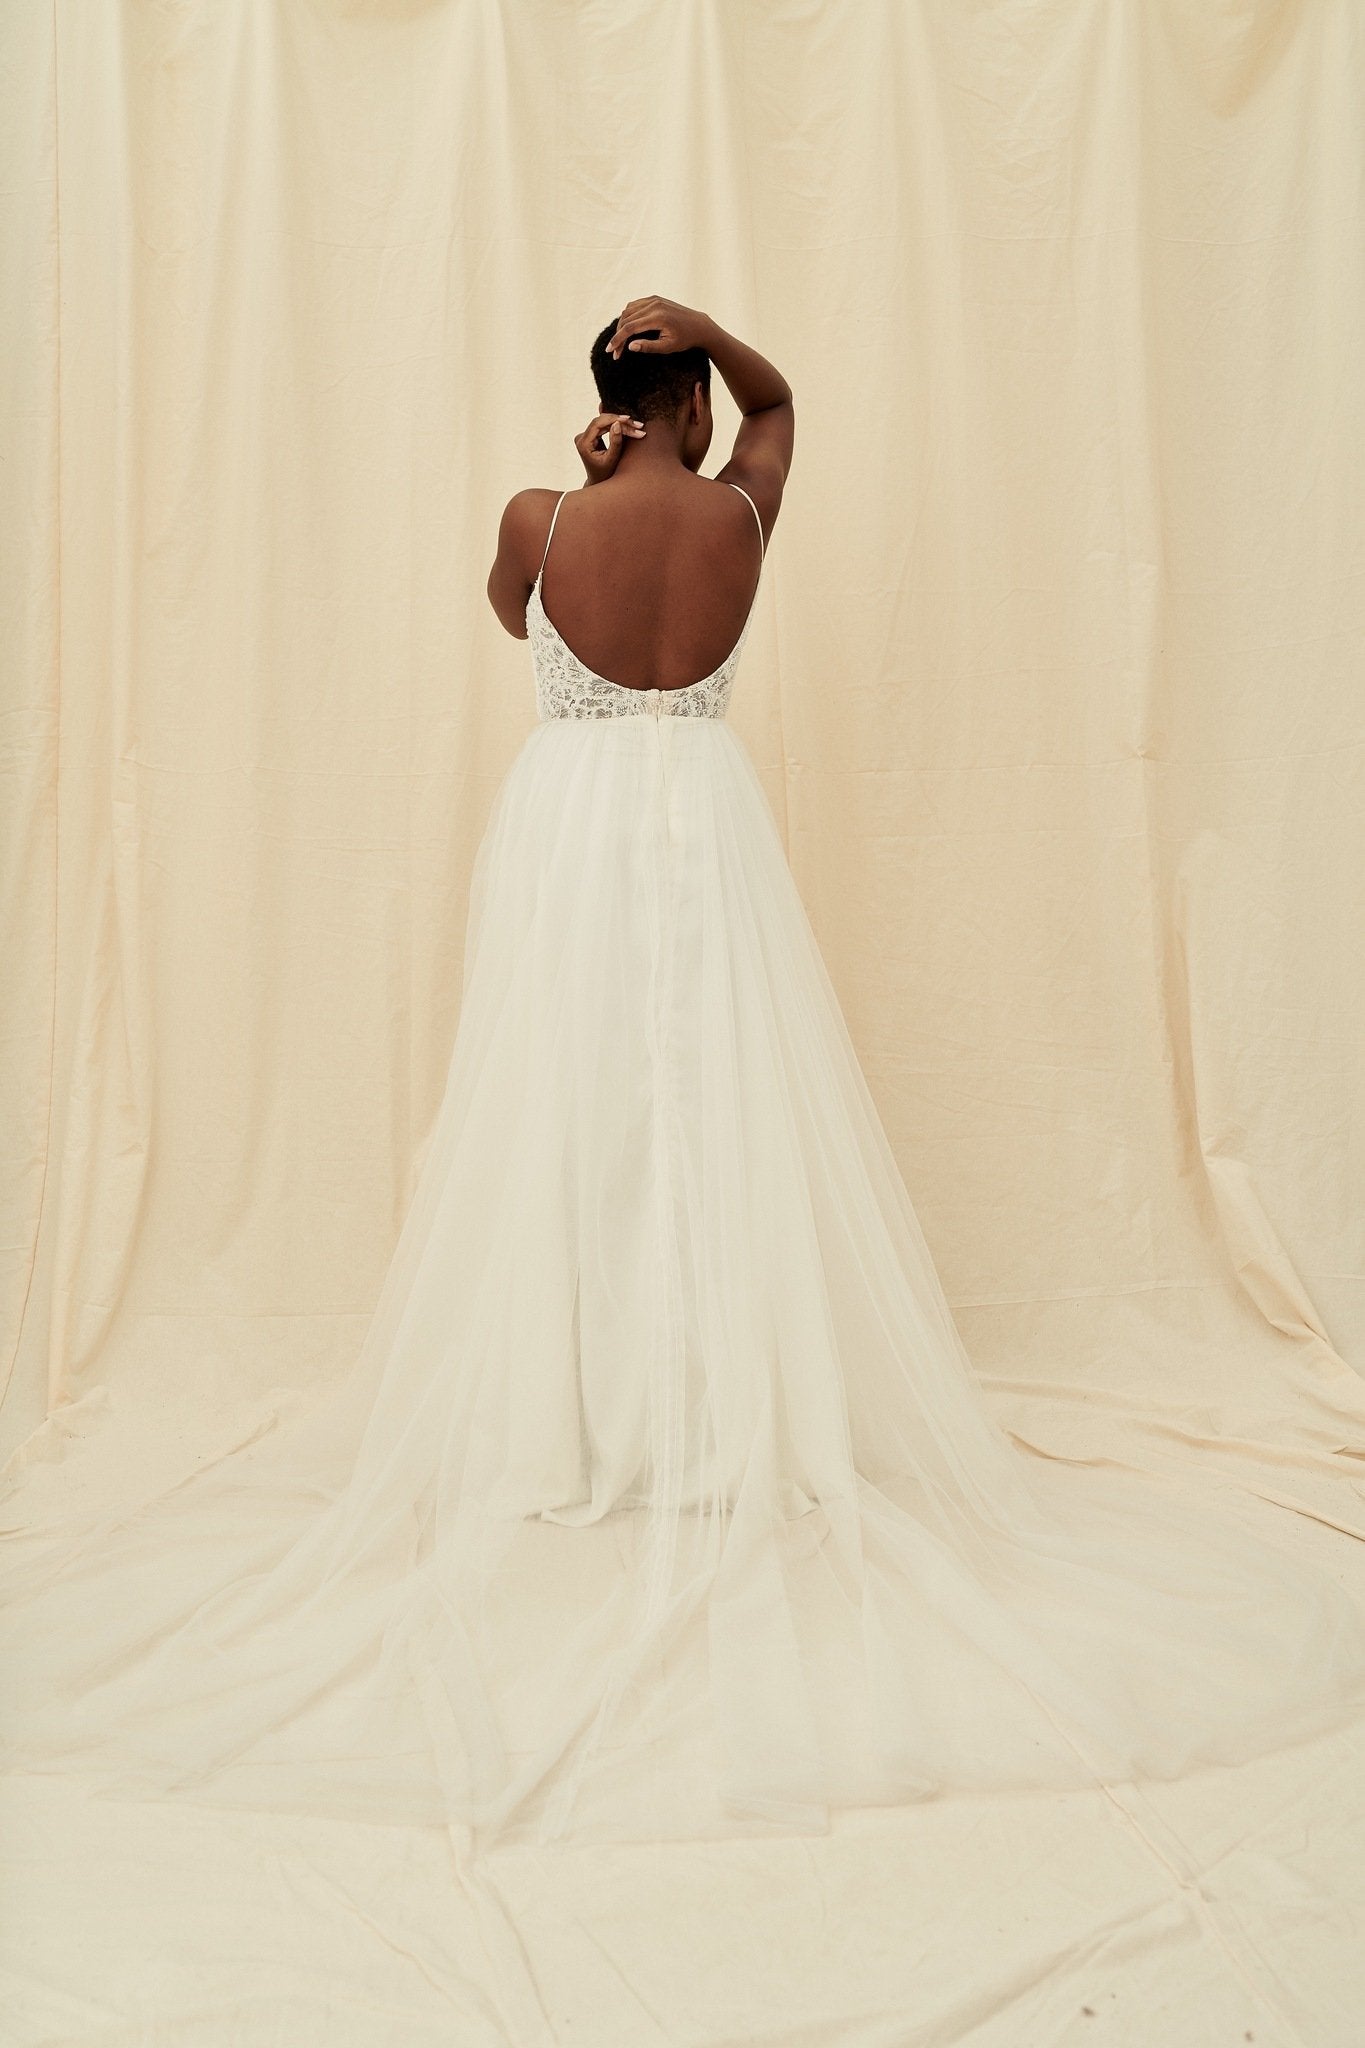 A scoop back dress with a plunging beaded bodice and a princess tulle skirt by Truvelle